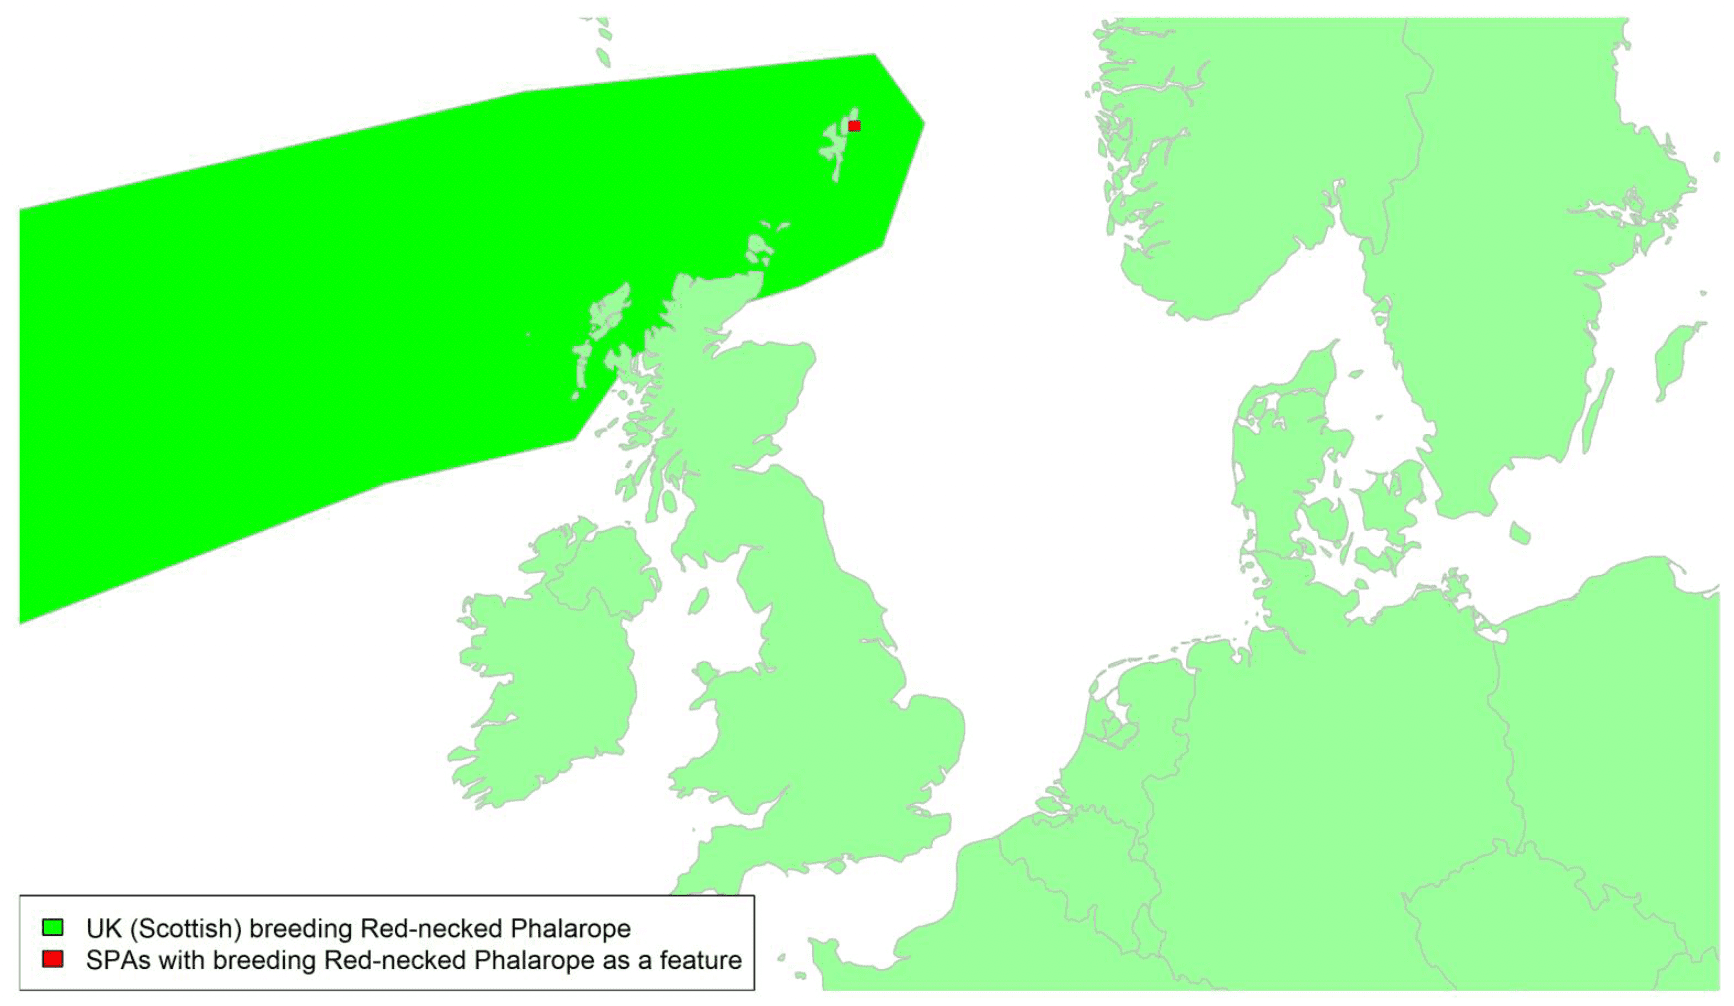 Map of North West Europe showing migratory routes and SPAs within the UK for Red-necked Phalarope as described in the text below.